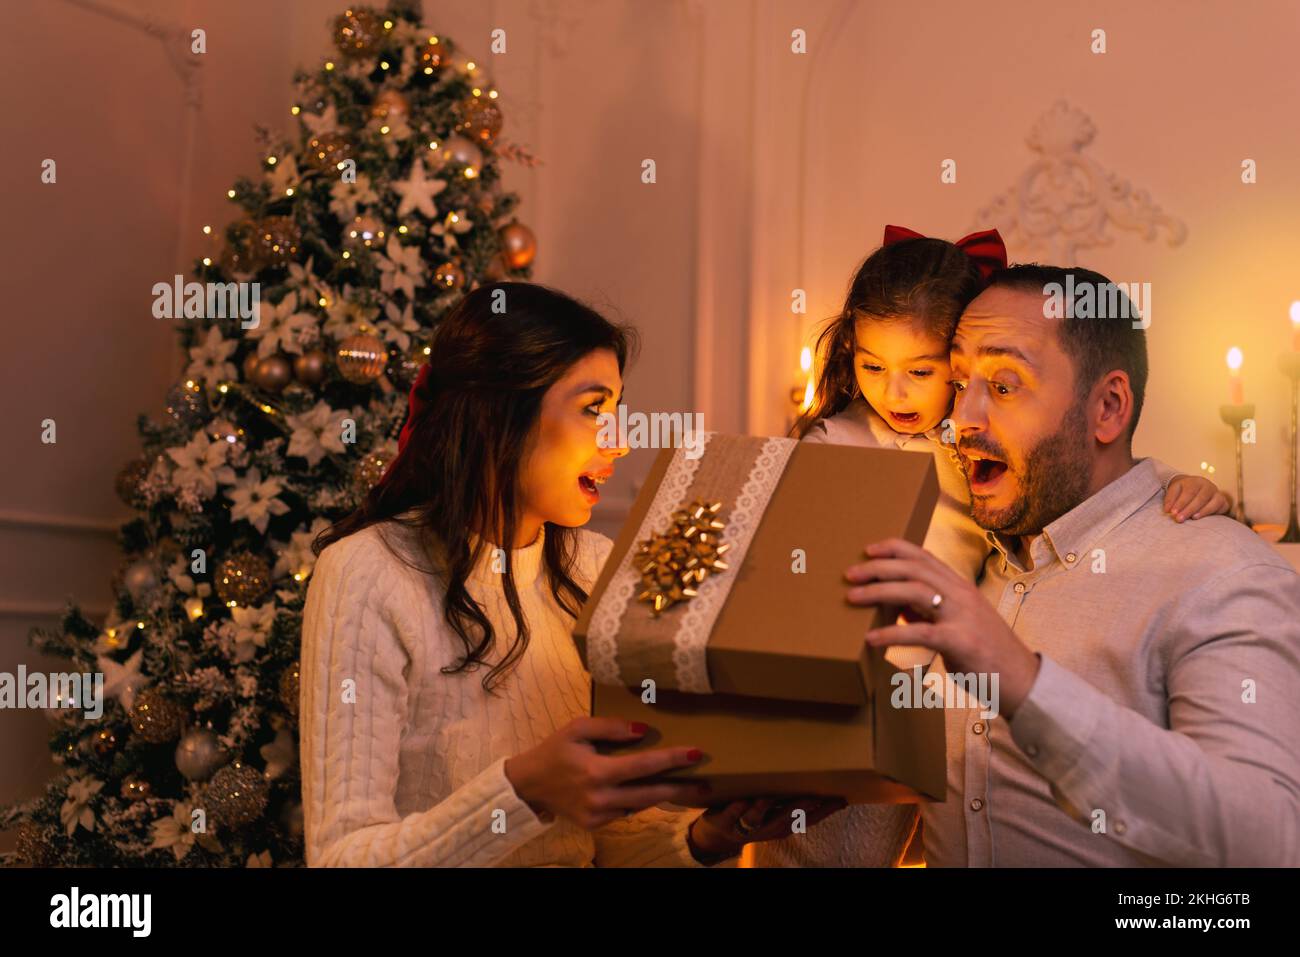 Happy family with surprising emotion while opening a gift box there is a christmas tree, fireplace and candles on the background. Stock Photo